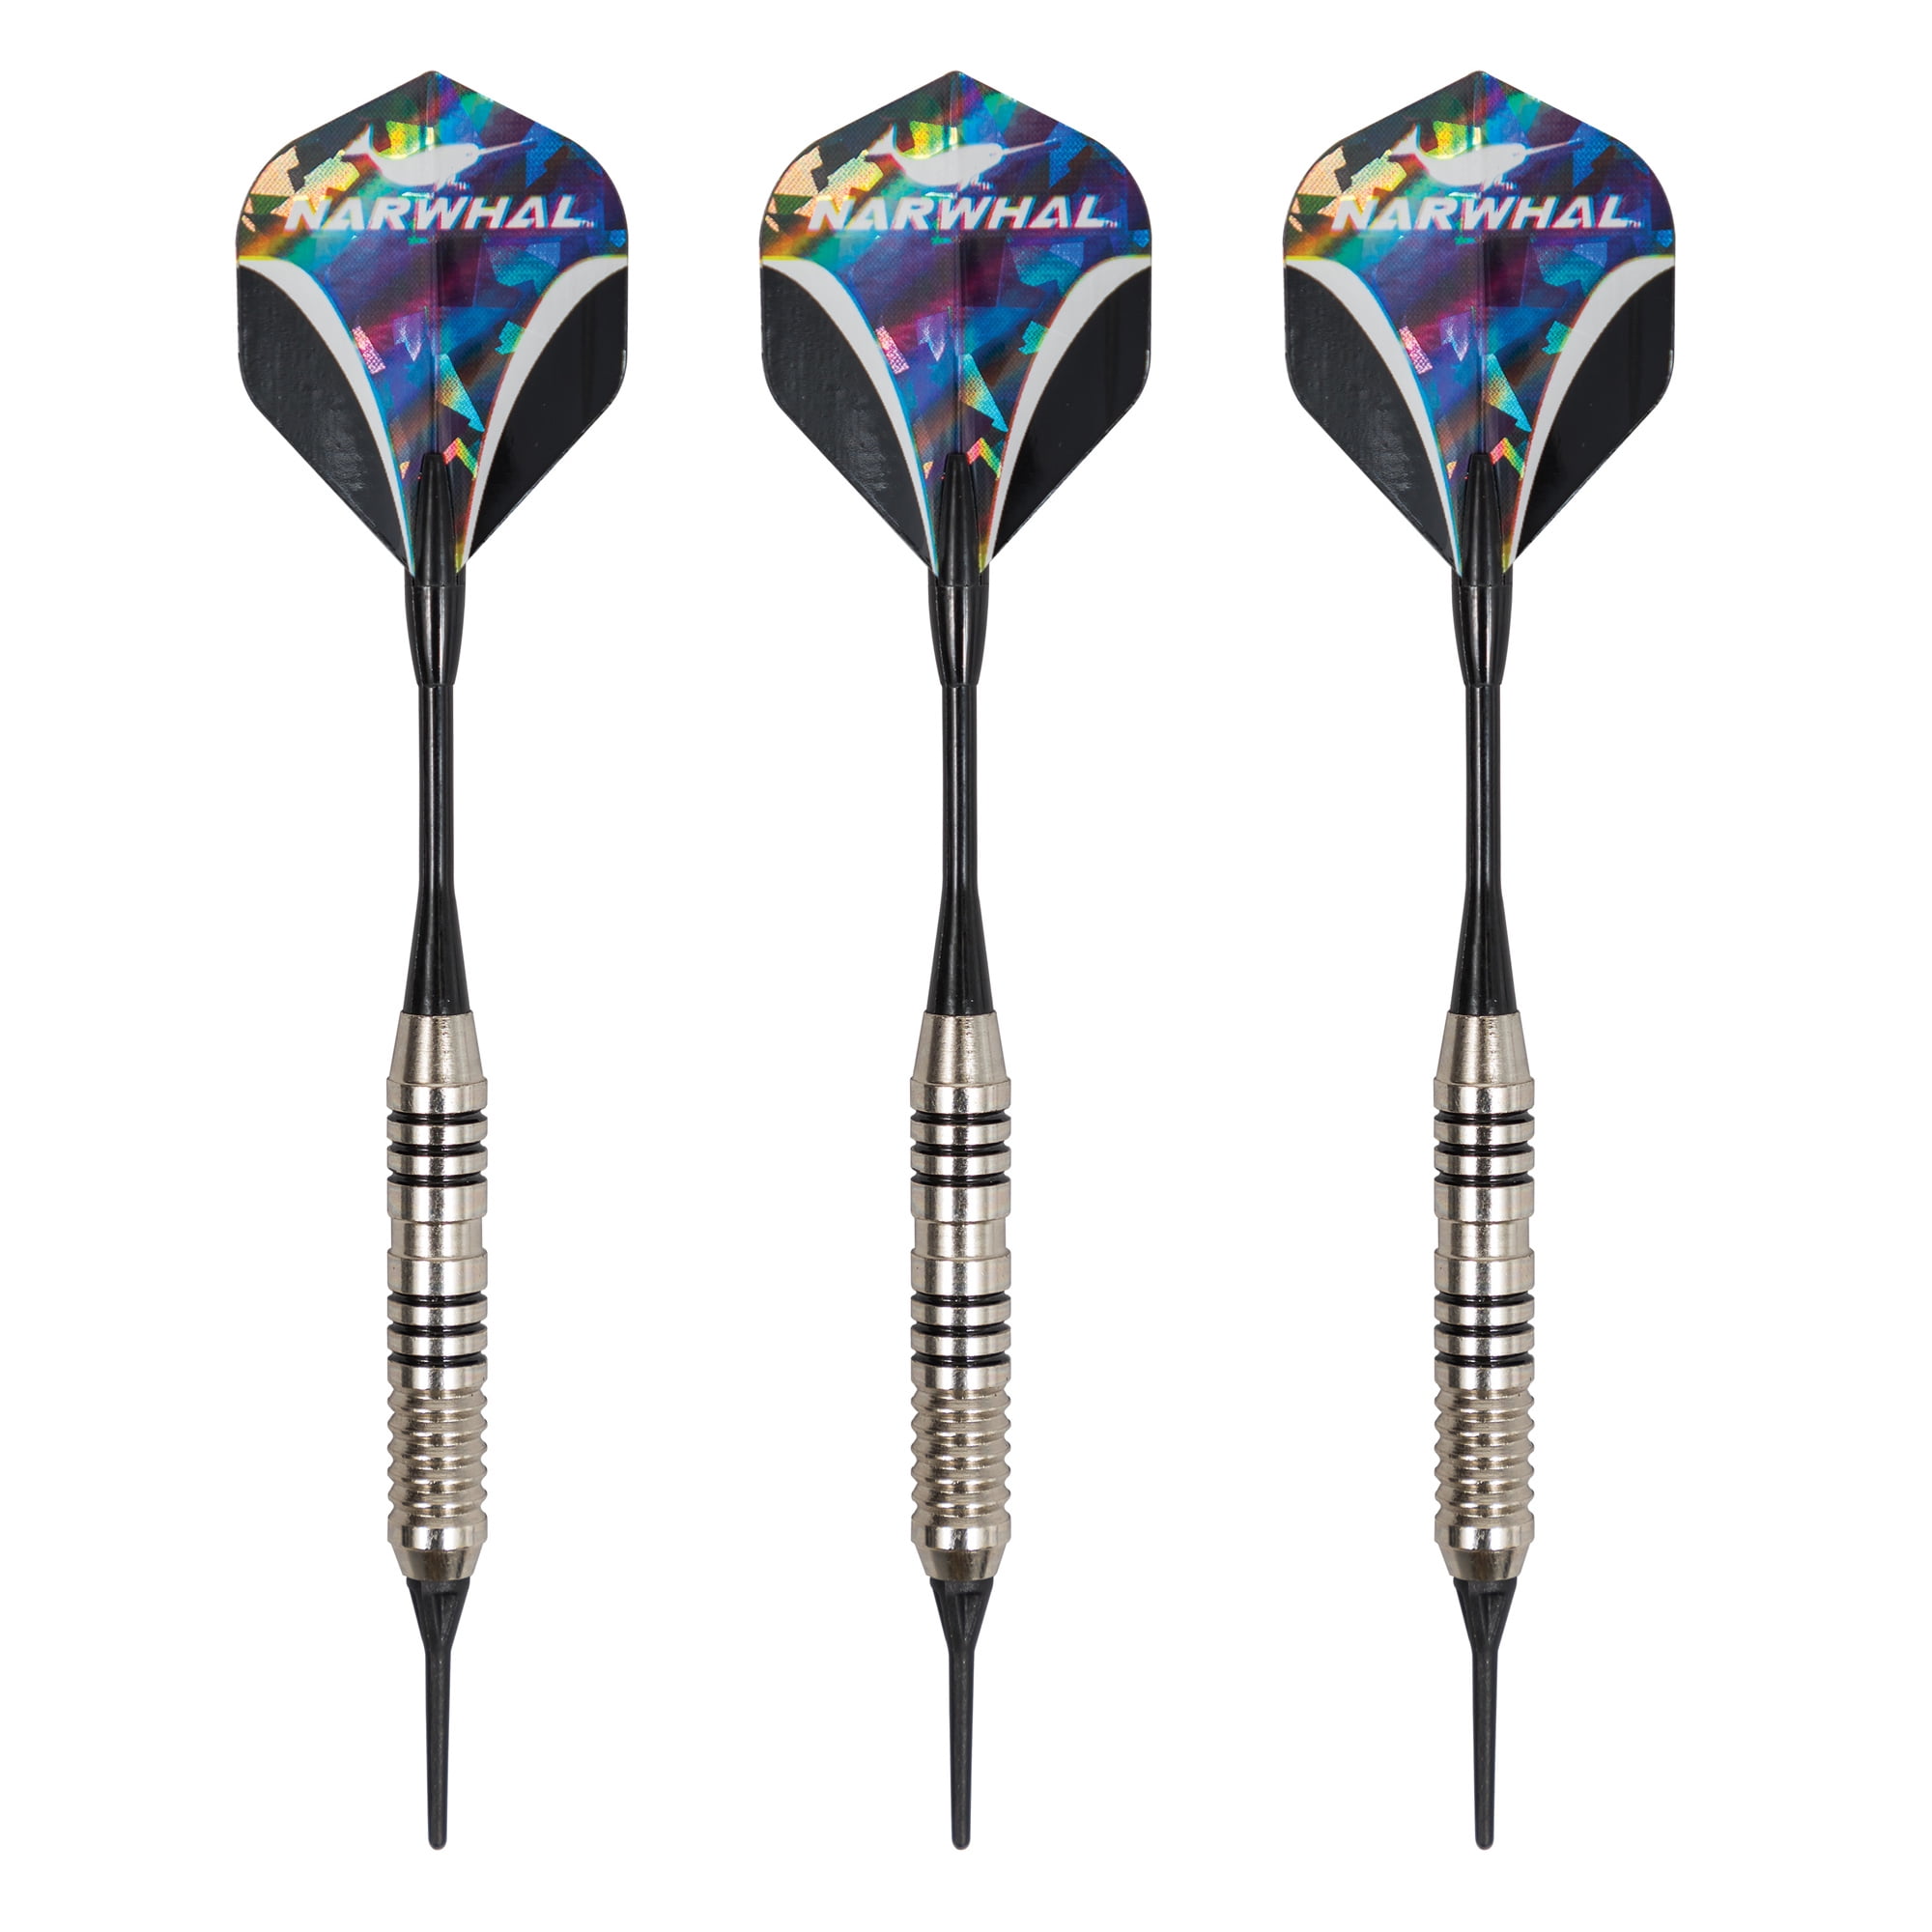 Narwhal Tournament Soft Tip Darts (5.5 in. - 18g) with Nickel Barrell and Deluxe Storage Case, 3 Pack